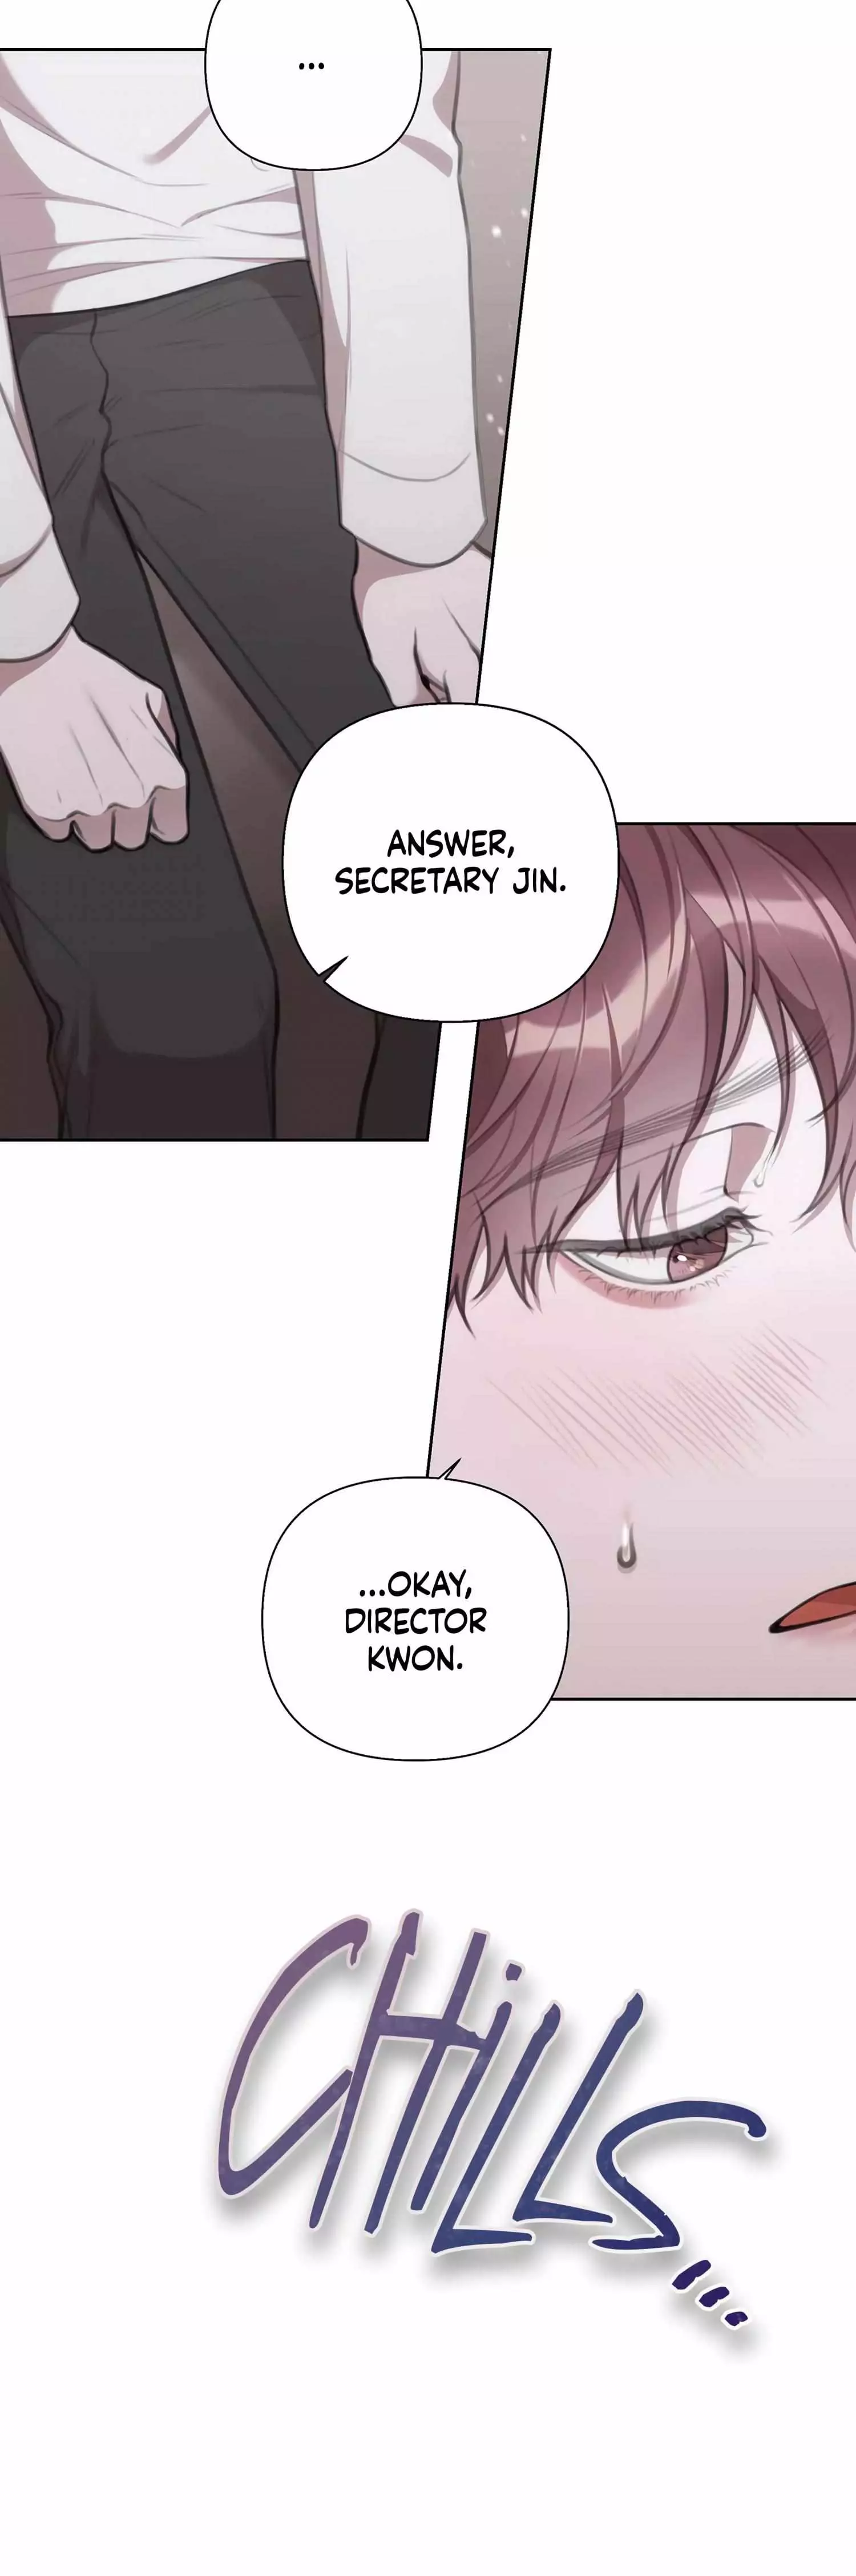 Secretary Jin's Confinement Diary - 16 page 19-ee0c9408